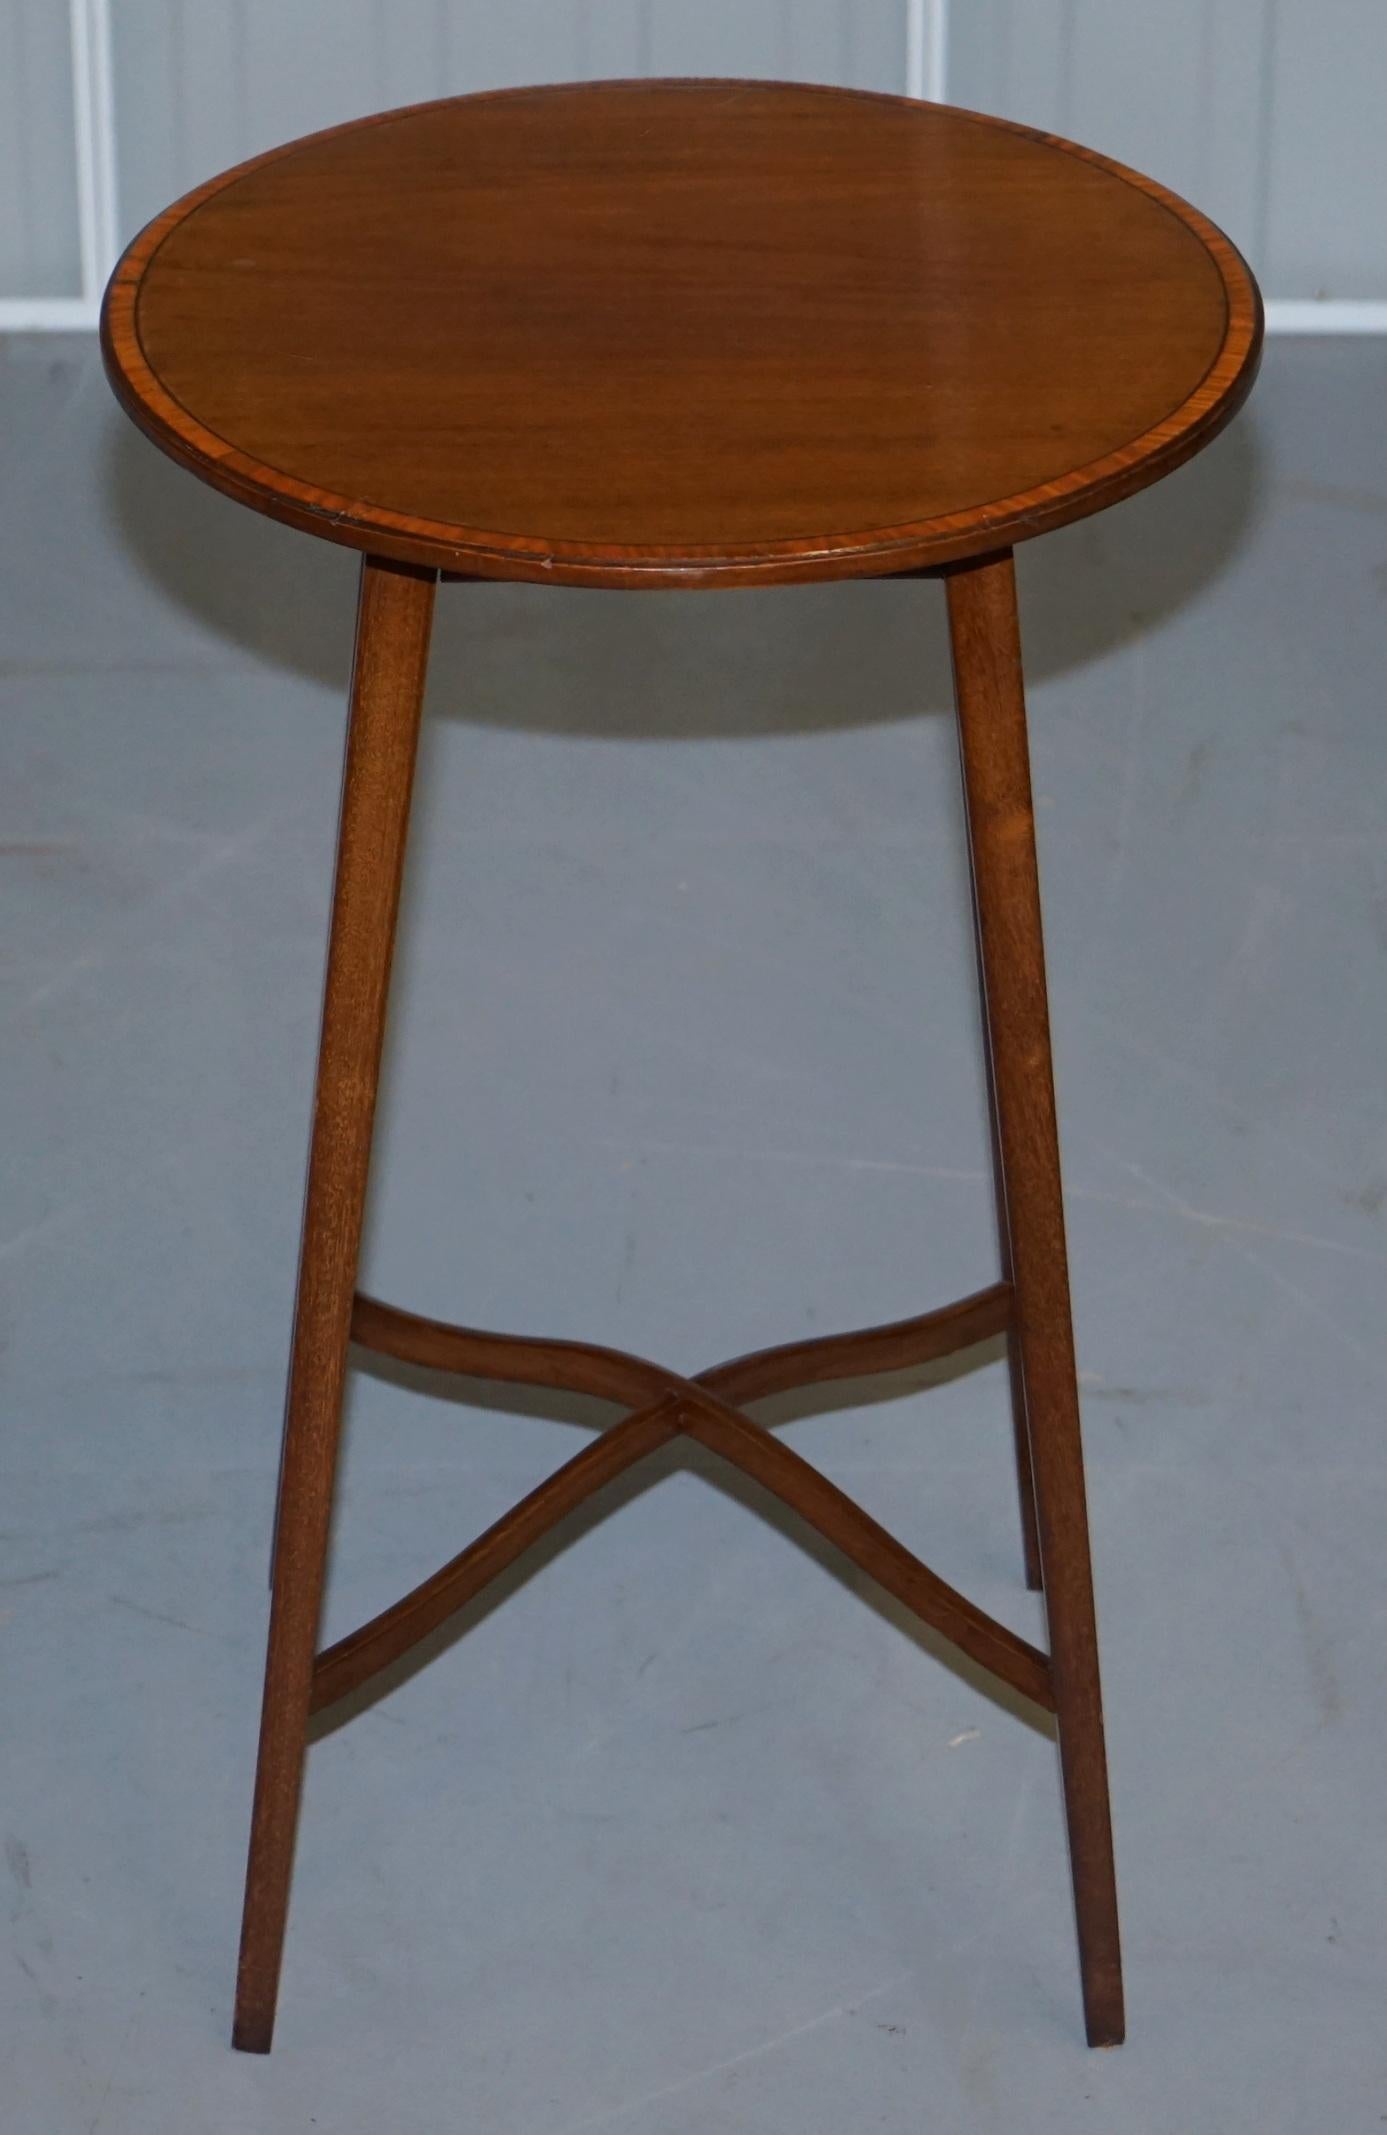 We are delighted to this absolutely stunning vintage flamed mahogany round side table

A very well made and decorative piece, the timber patina is sublime as are the sculpted stretches

We have cleaned waxed and polished it from top to bottom,